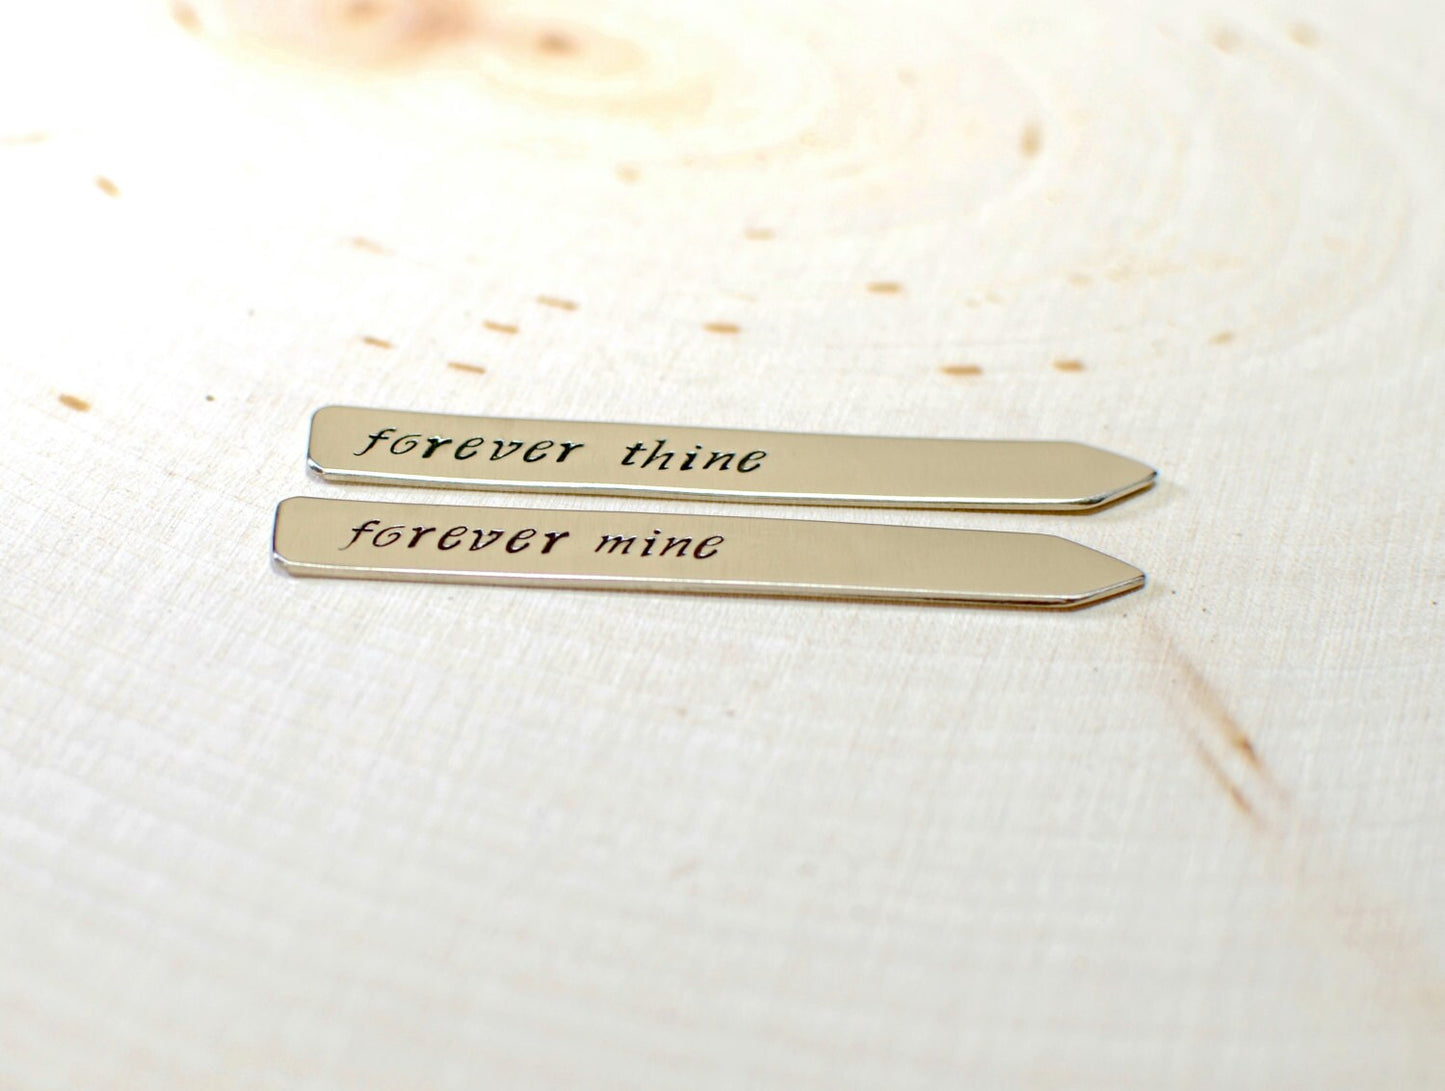 Collar stays with Forever thine forever mine on 925 sterling silver